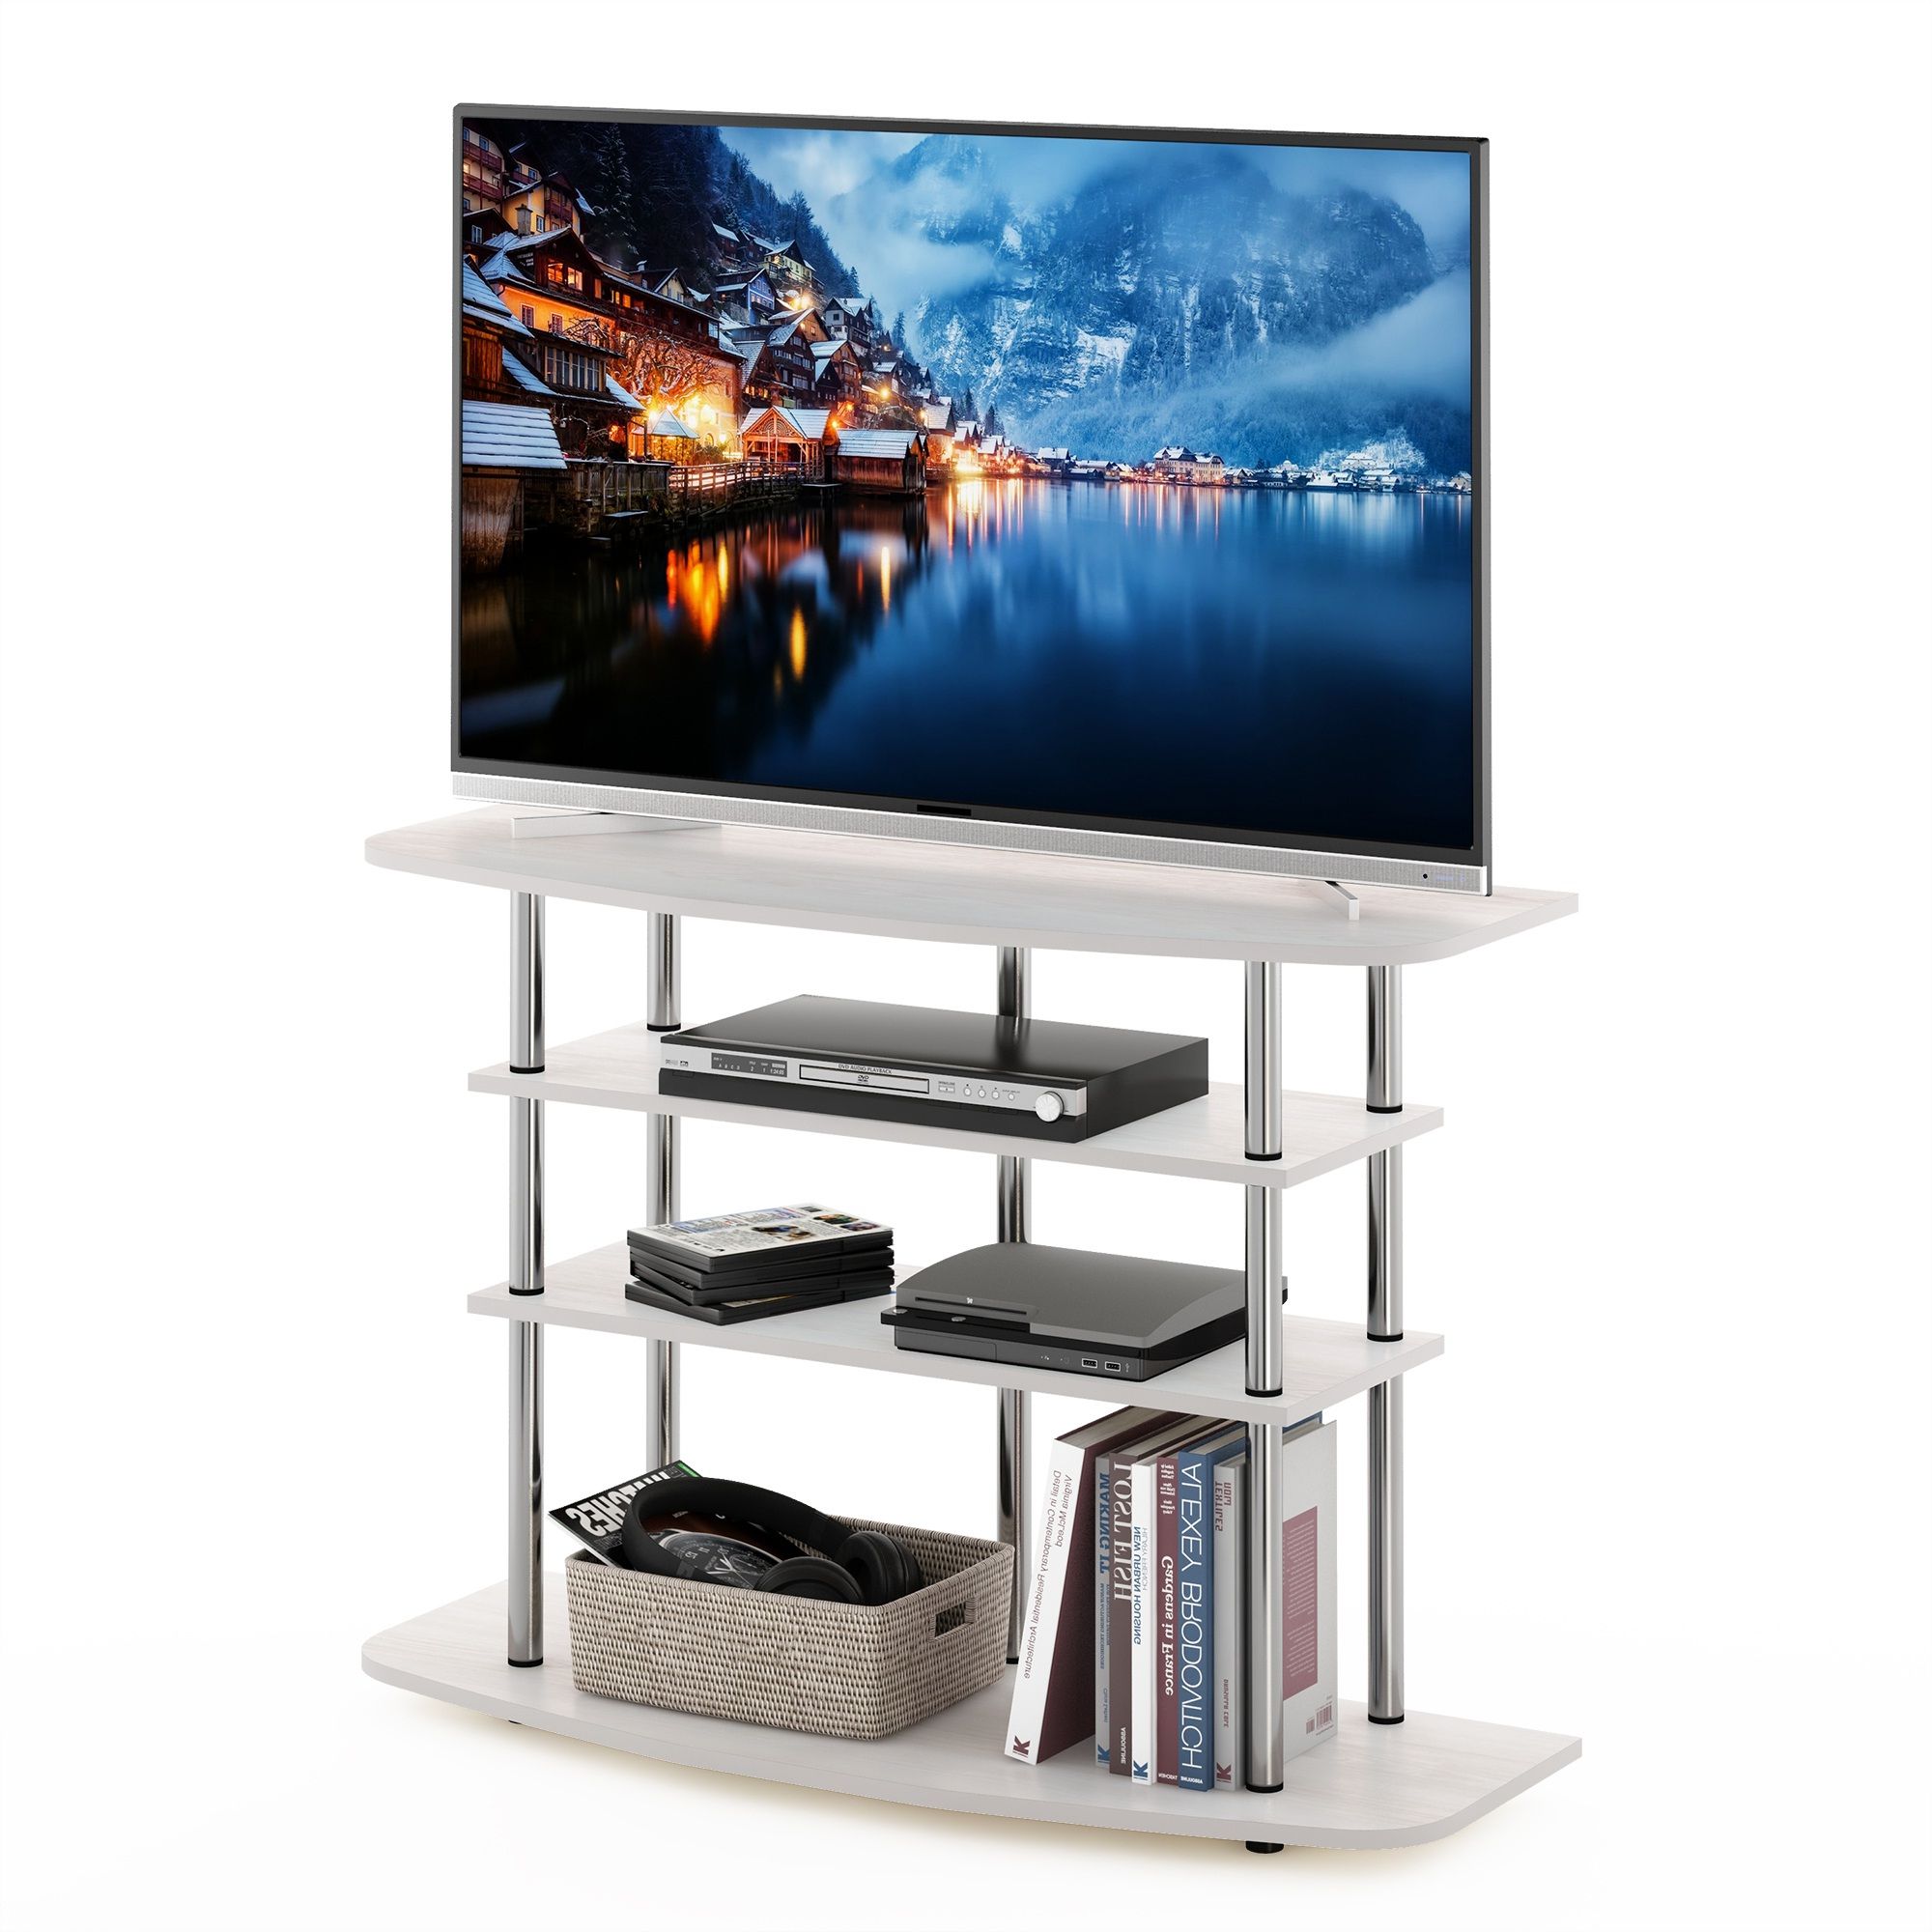 Furinno Frans Turn N Tube 4 Tier Tv Stand For Tv Up To 46 For Furinno Jaya Large Tv Stands With Storage Bin (Gallery 9 of 20)